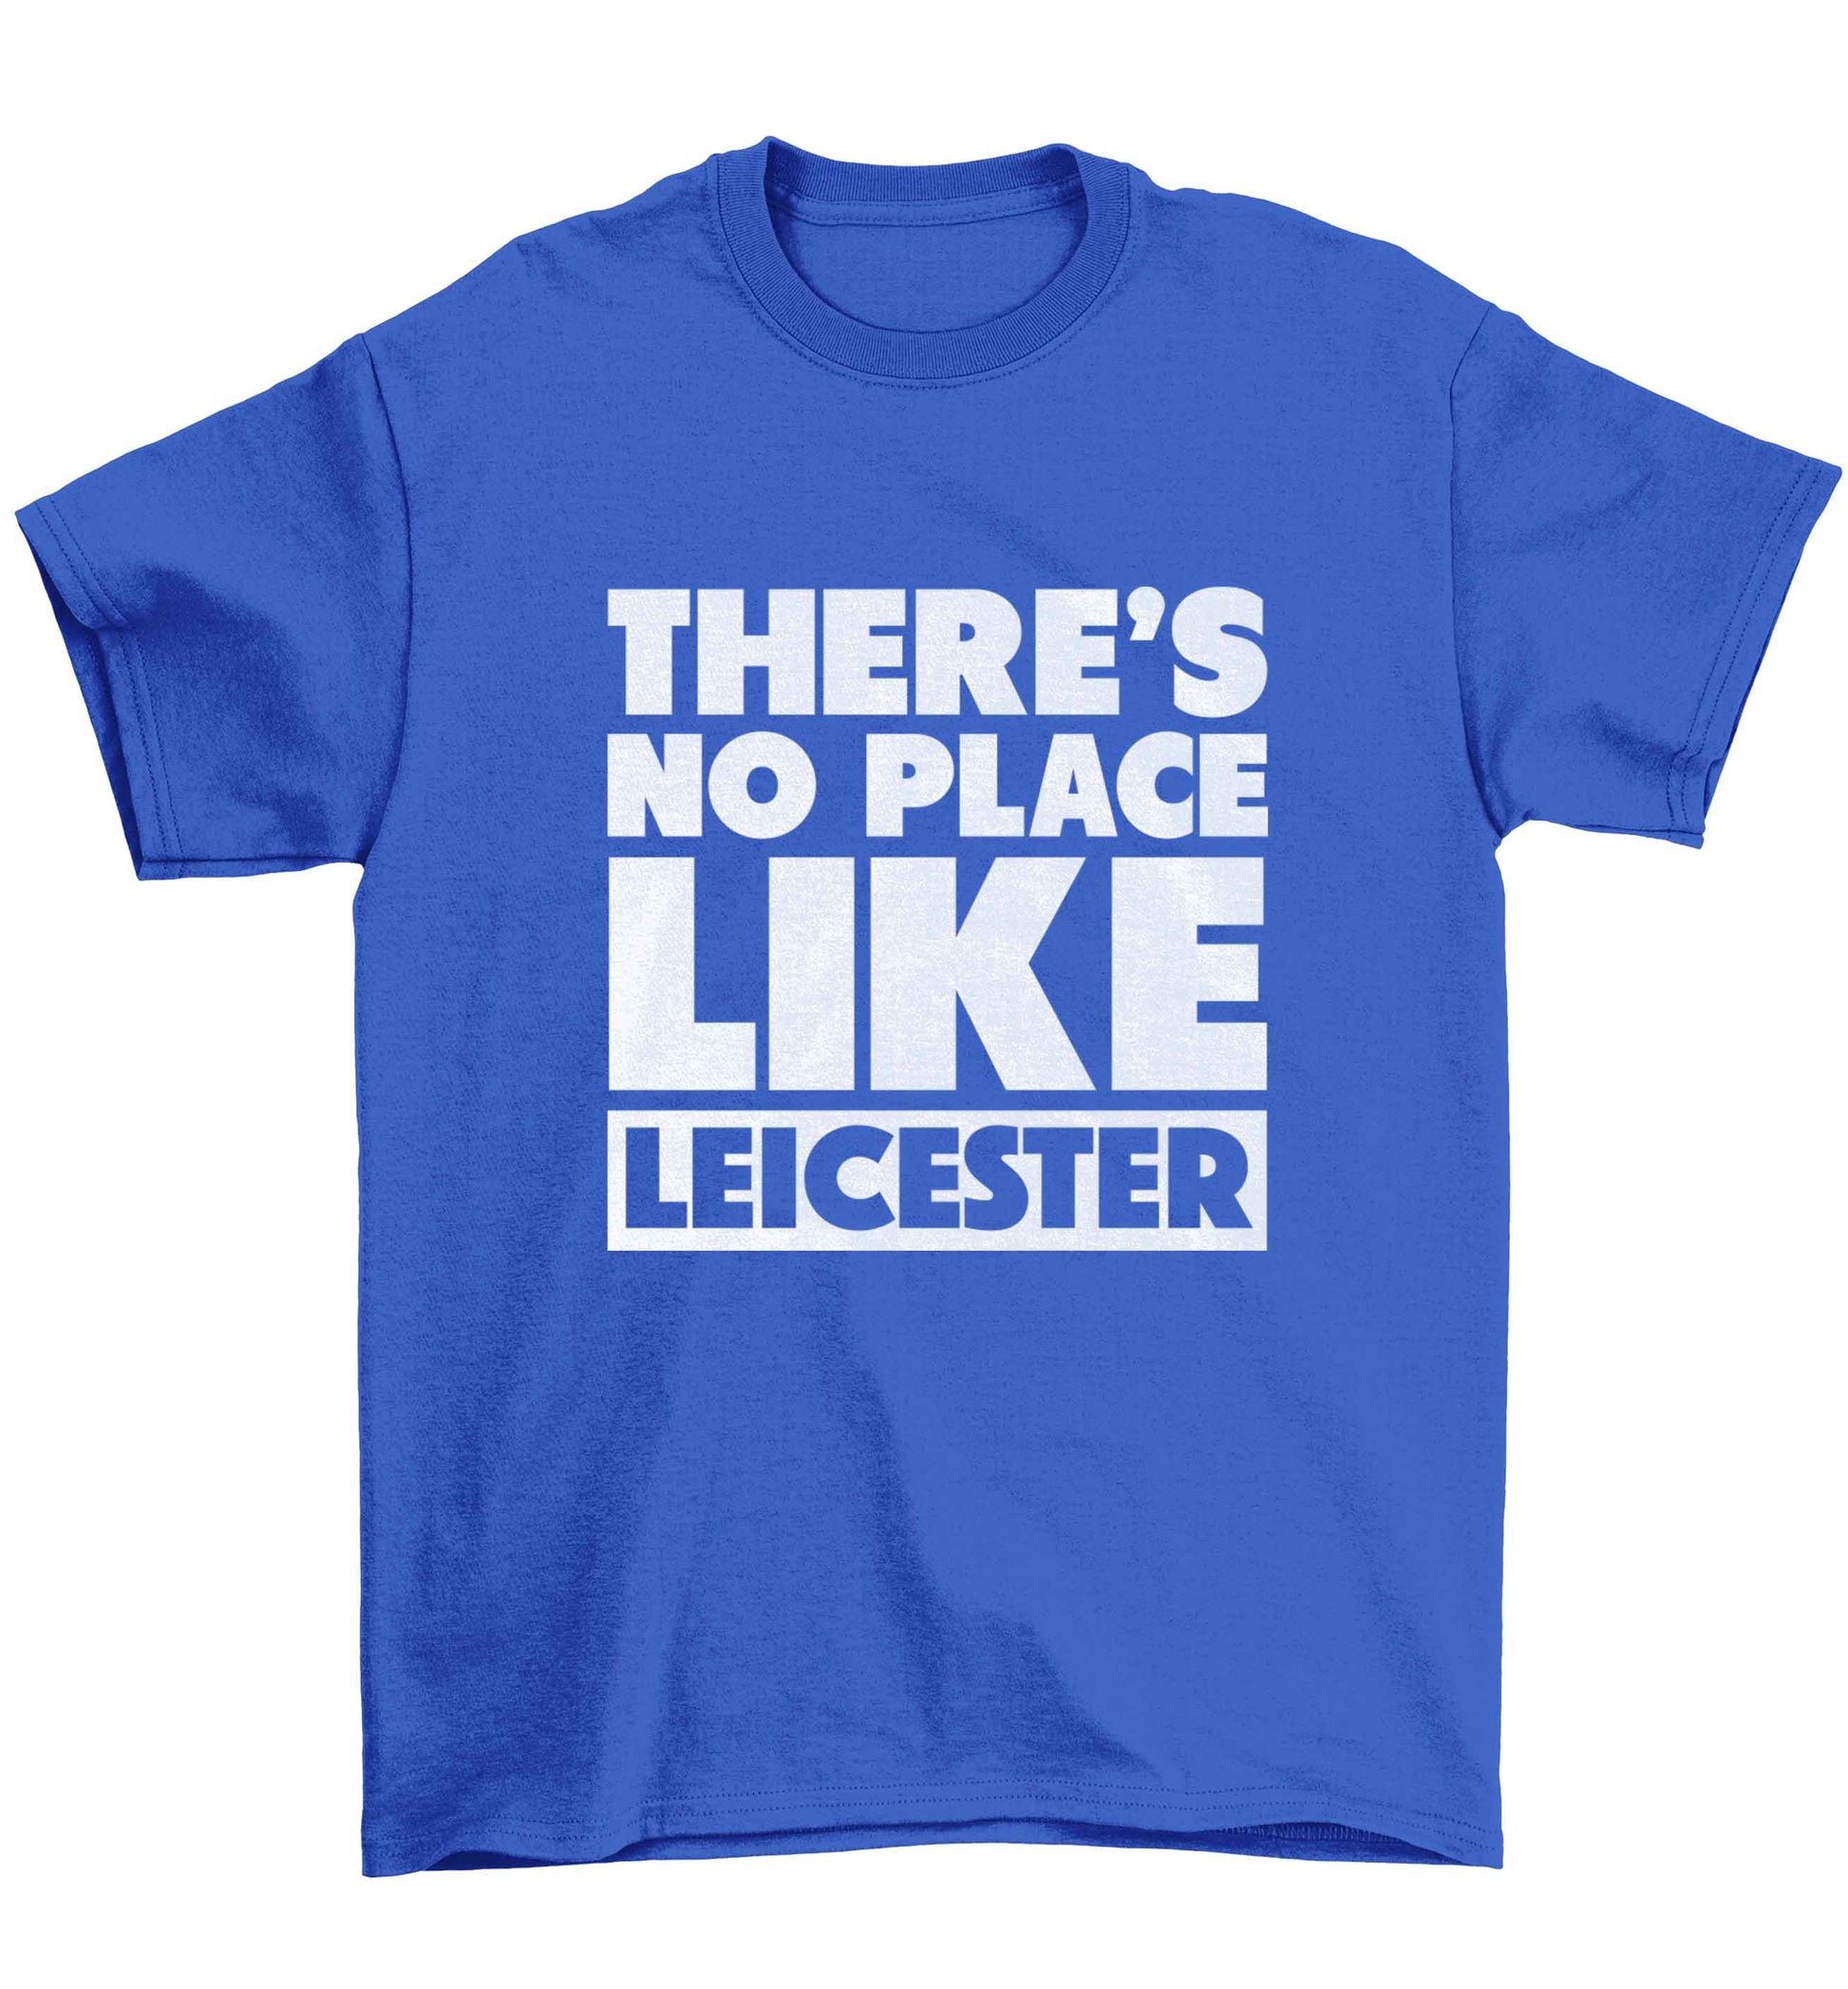 There's no place like Leicester Children's blue Tshirt 12-13 Years